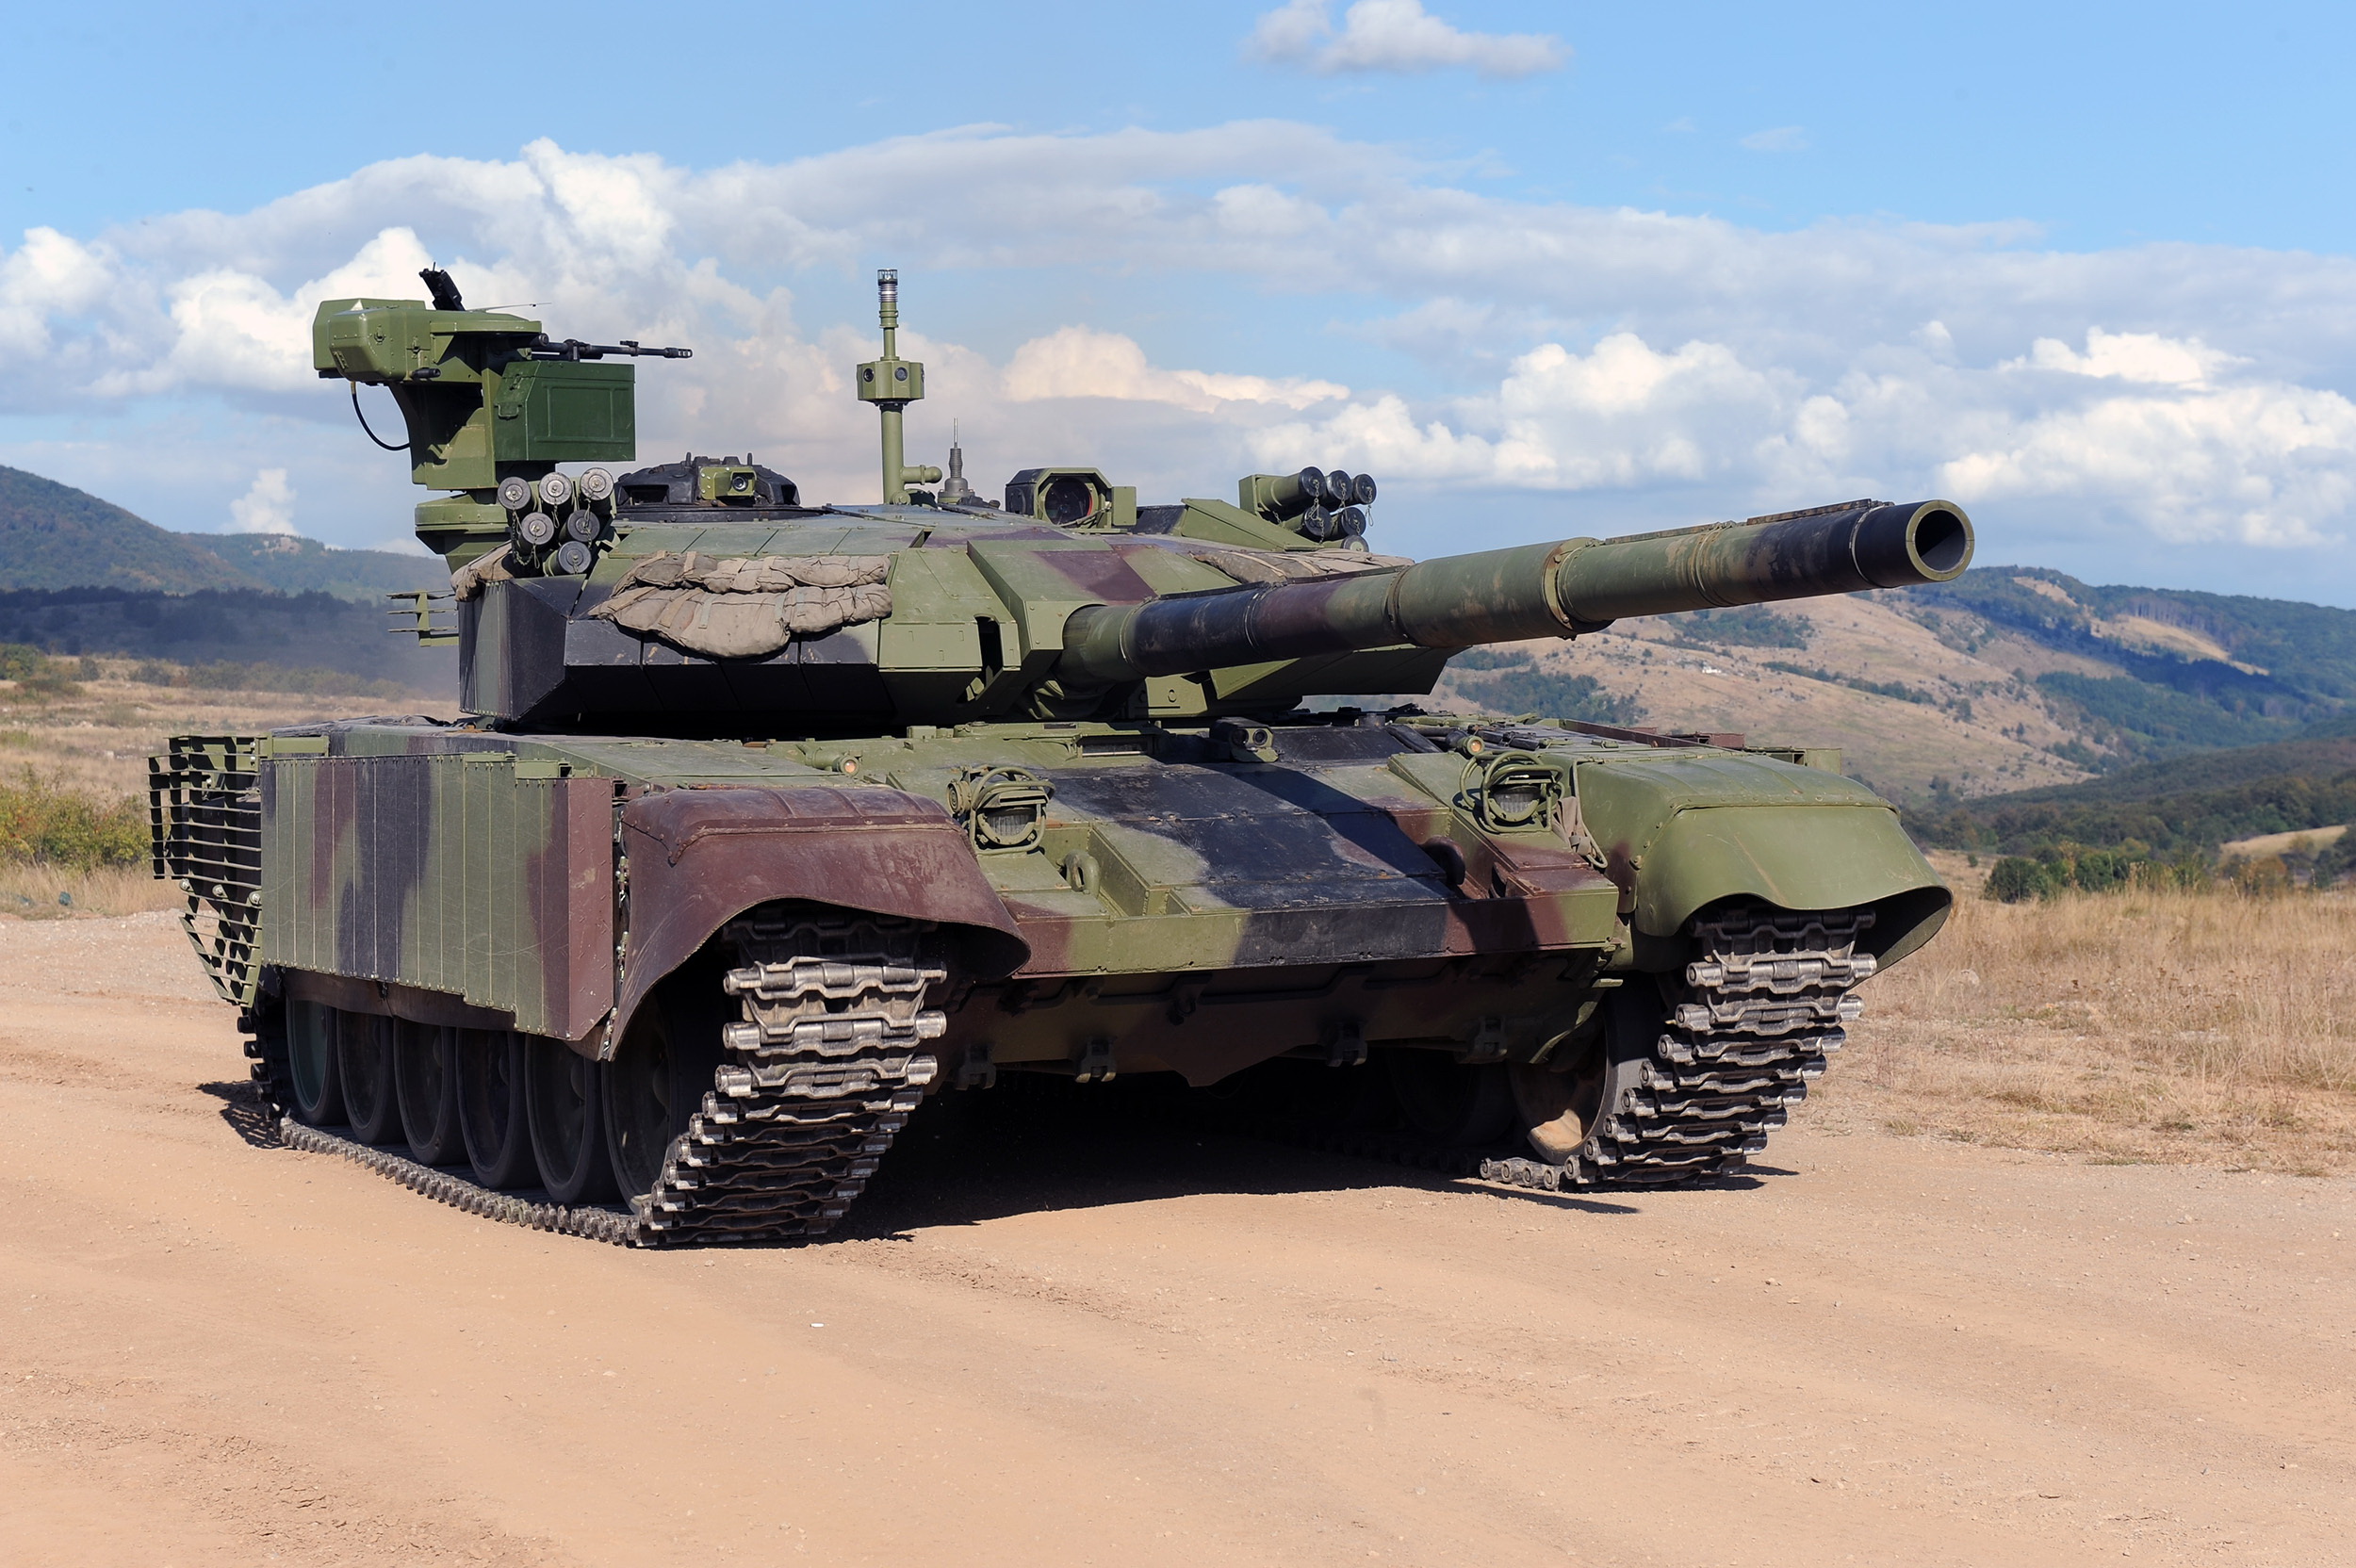 Serbian Ministry of Defence Showcases Upgraded M-84 AS1 Main Battle Tanks